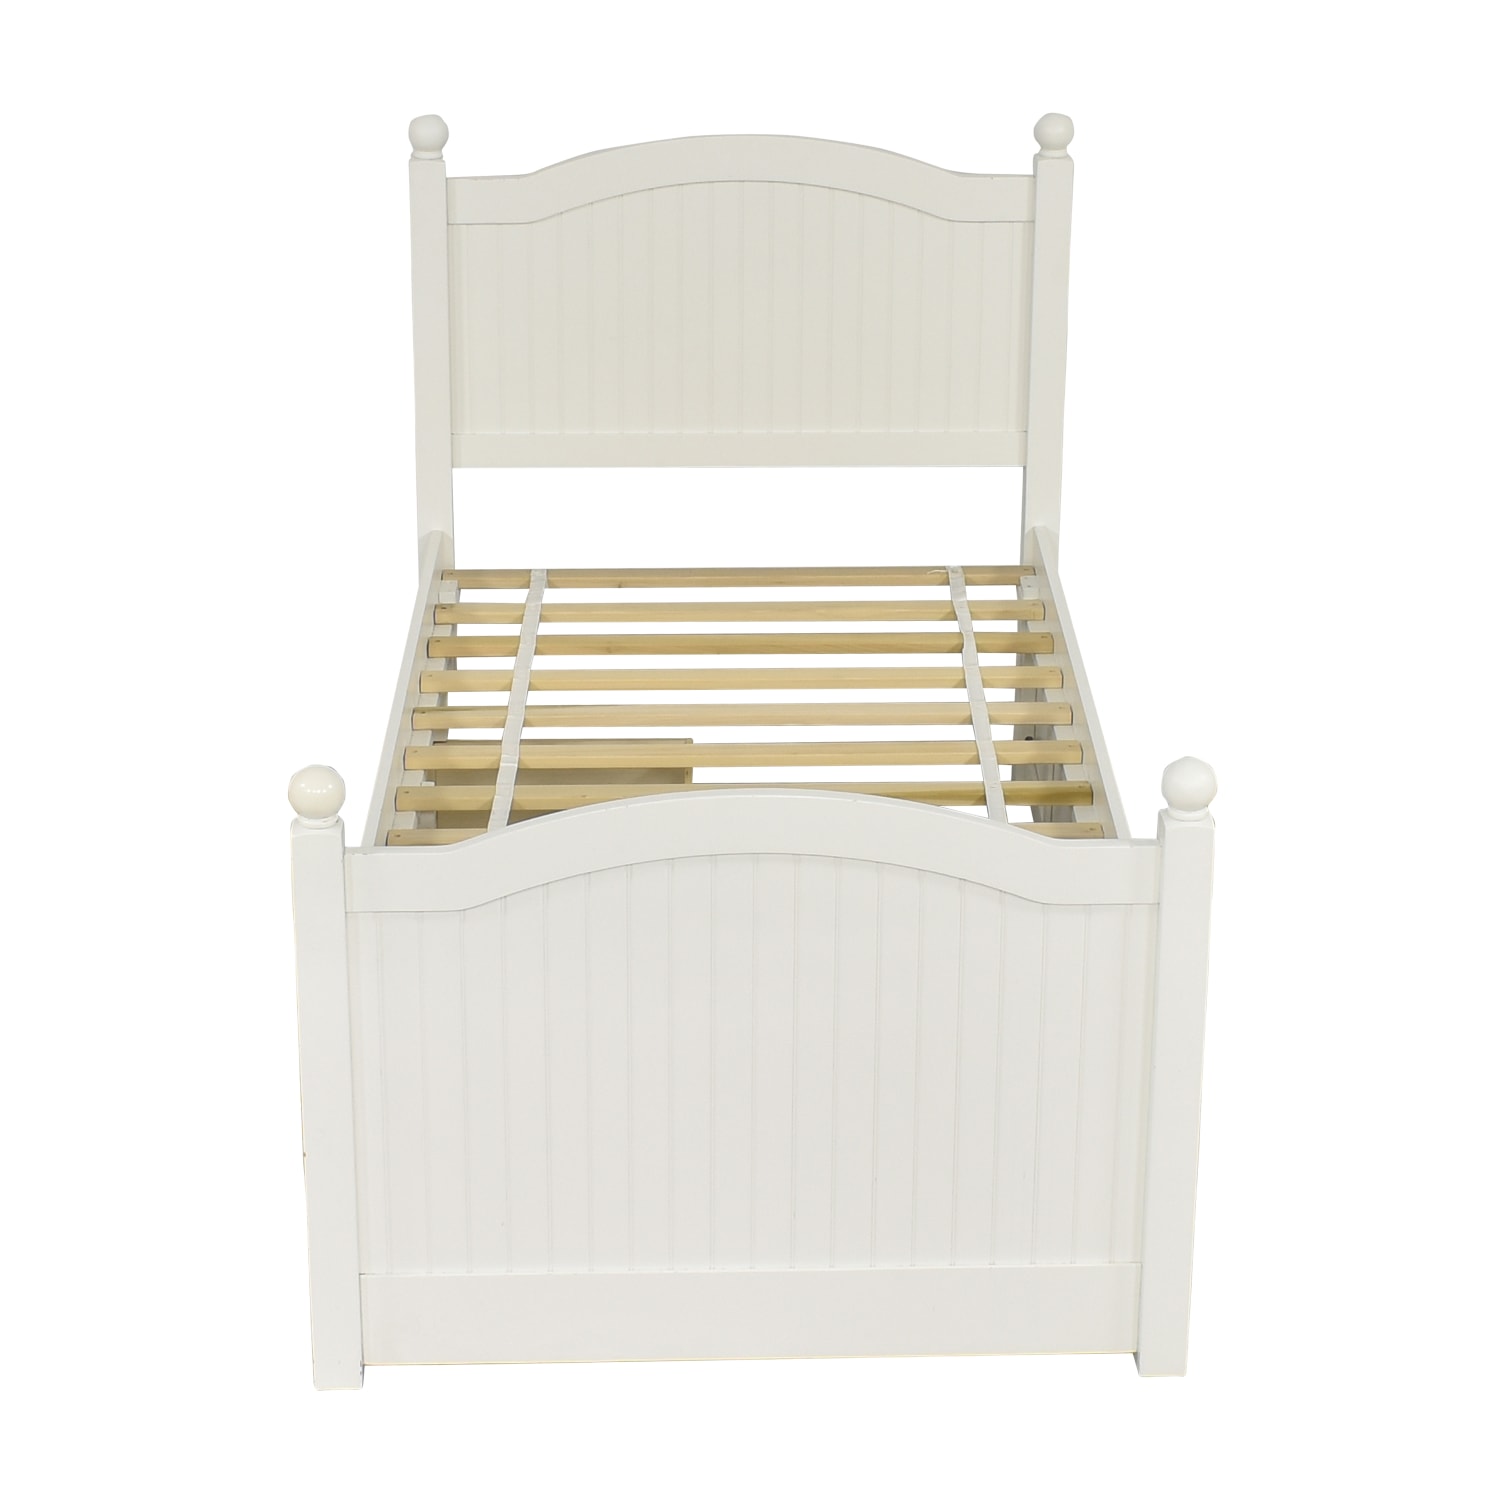 Pottery barn kids Catalina twin bed frame. USED, WHITE